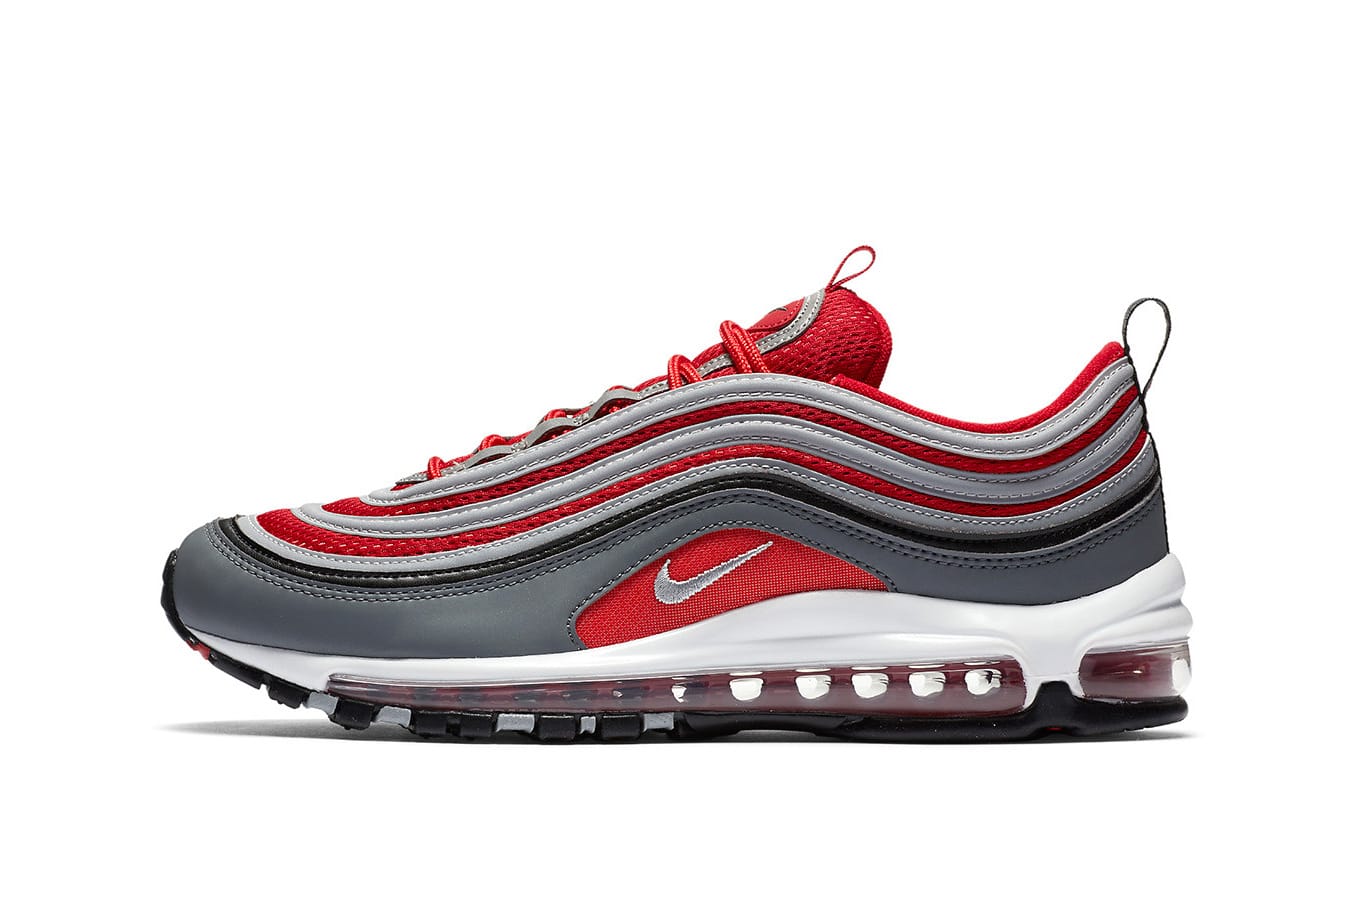 Nike Air Max 97 in Red/Grey/White/Black 